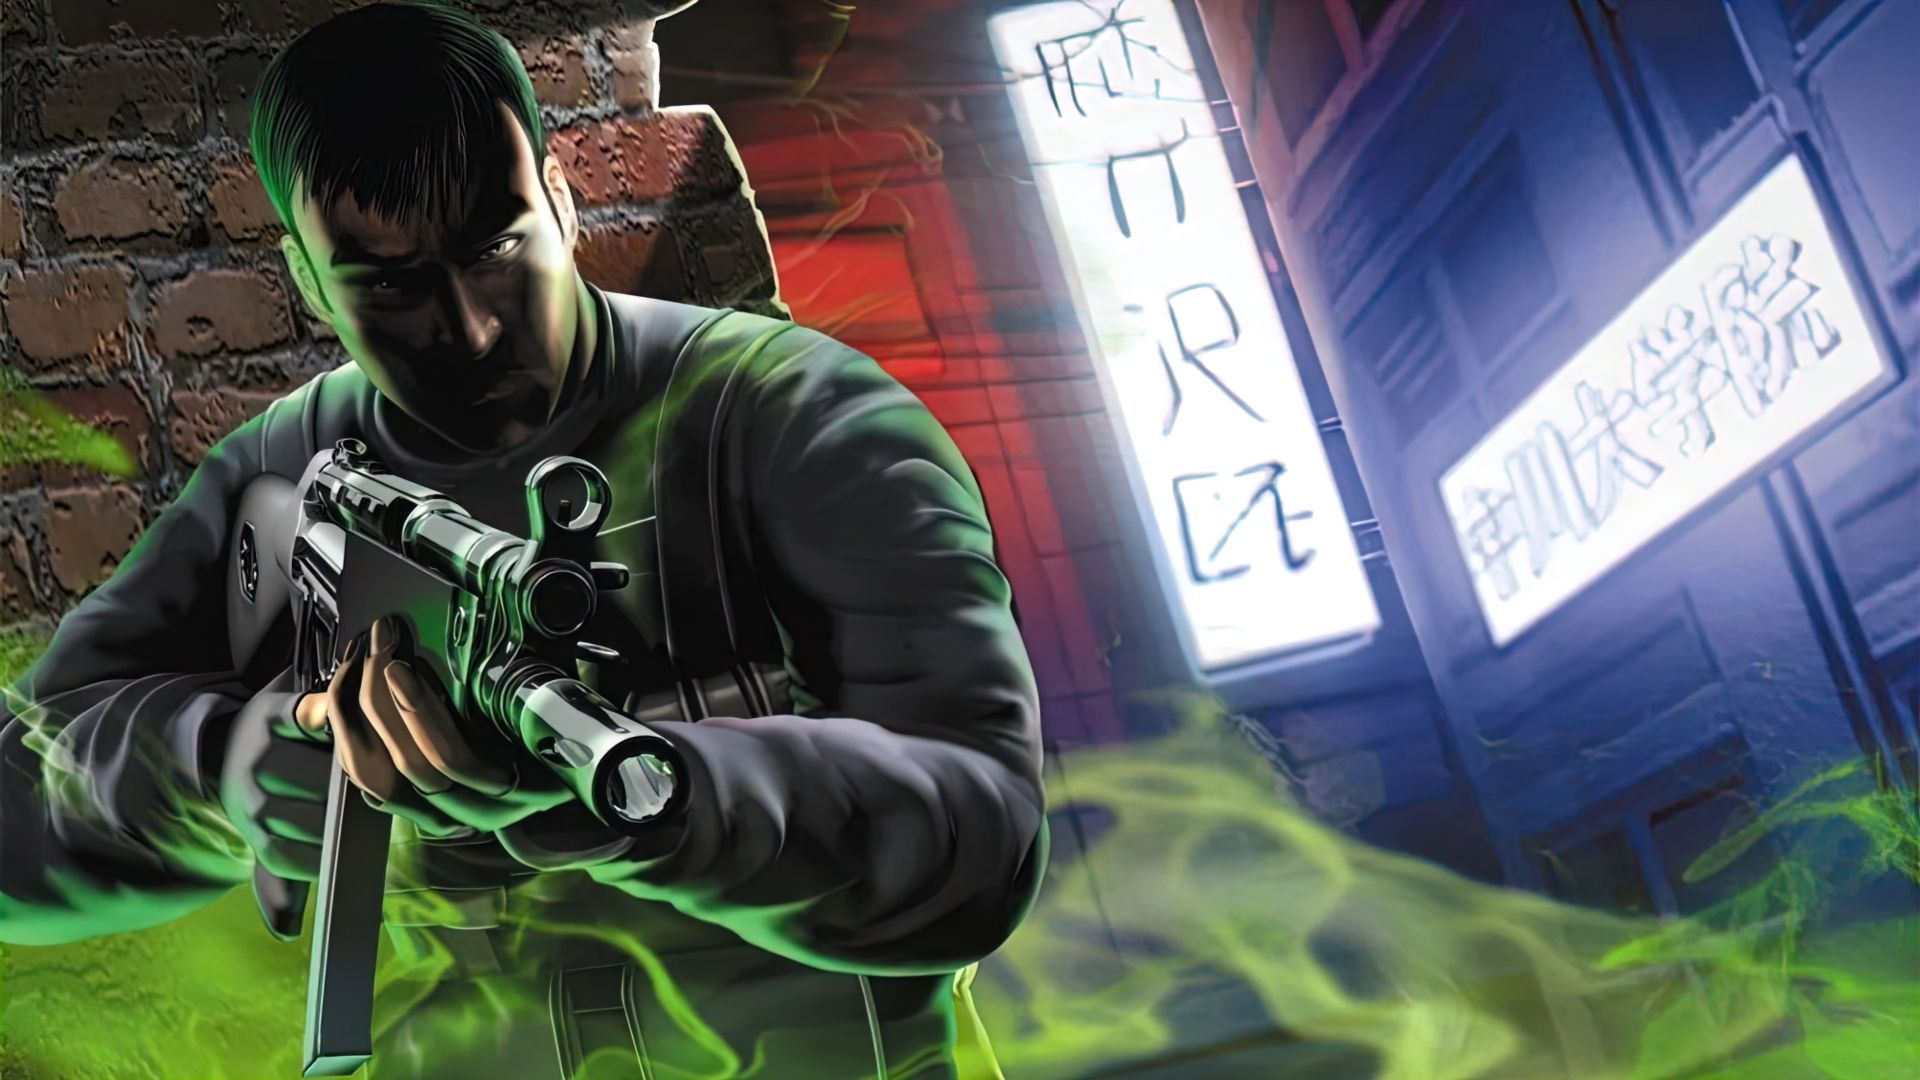 Bend Studio - ICYMI: Syphon Filter 2 hits PlayStation Plus